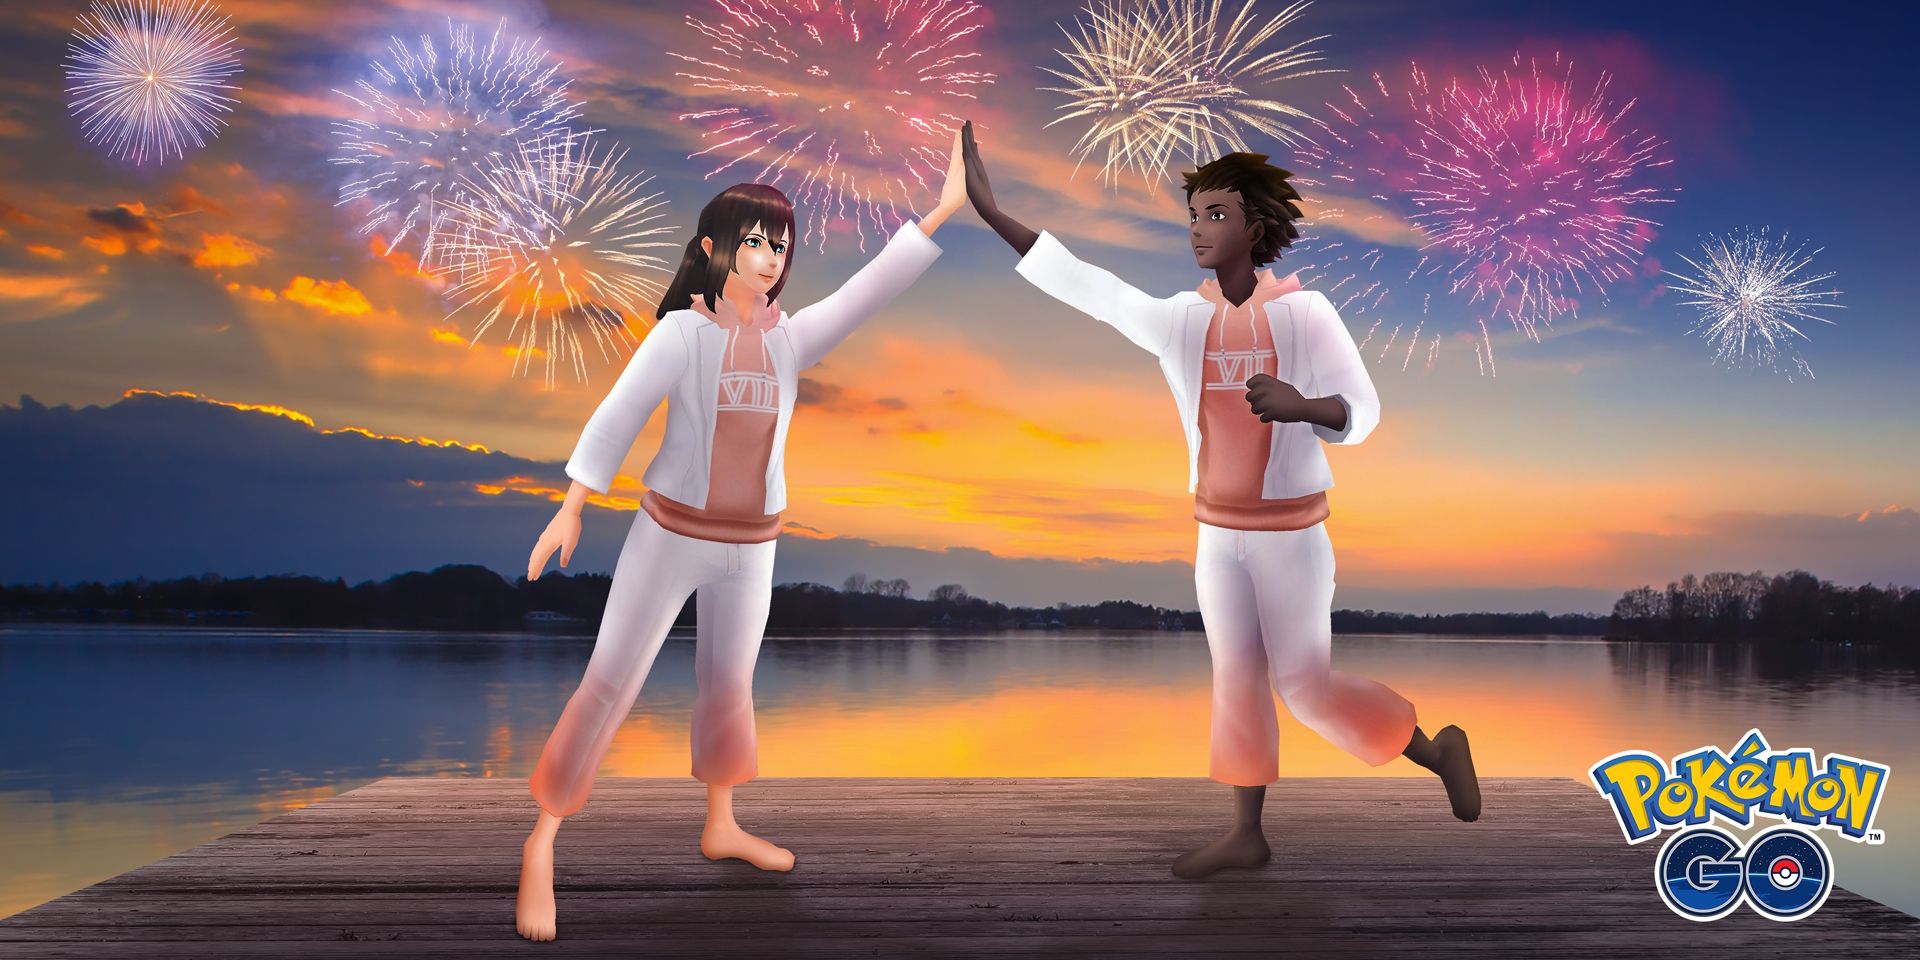 Two Pokemon Go Avatars high-fiving and wearing 7th Anniversary avatar items